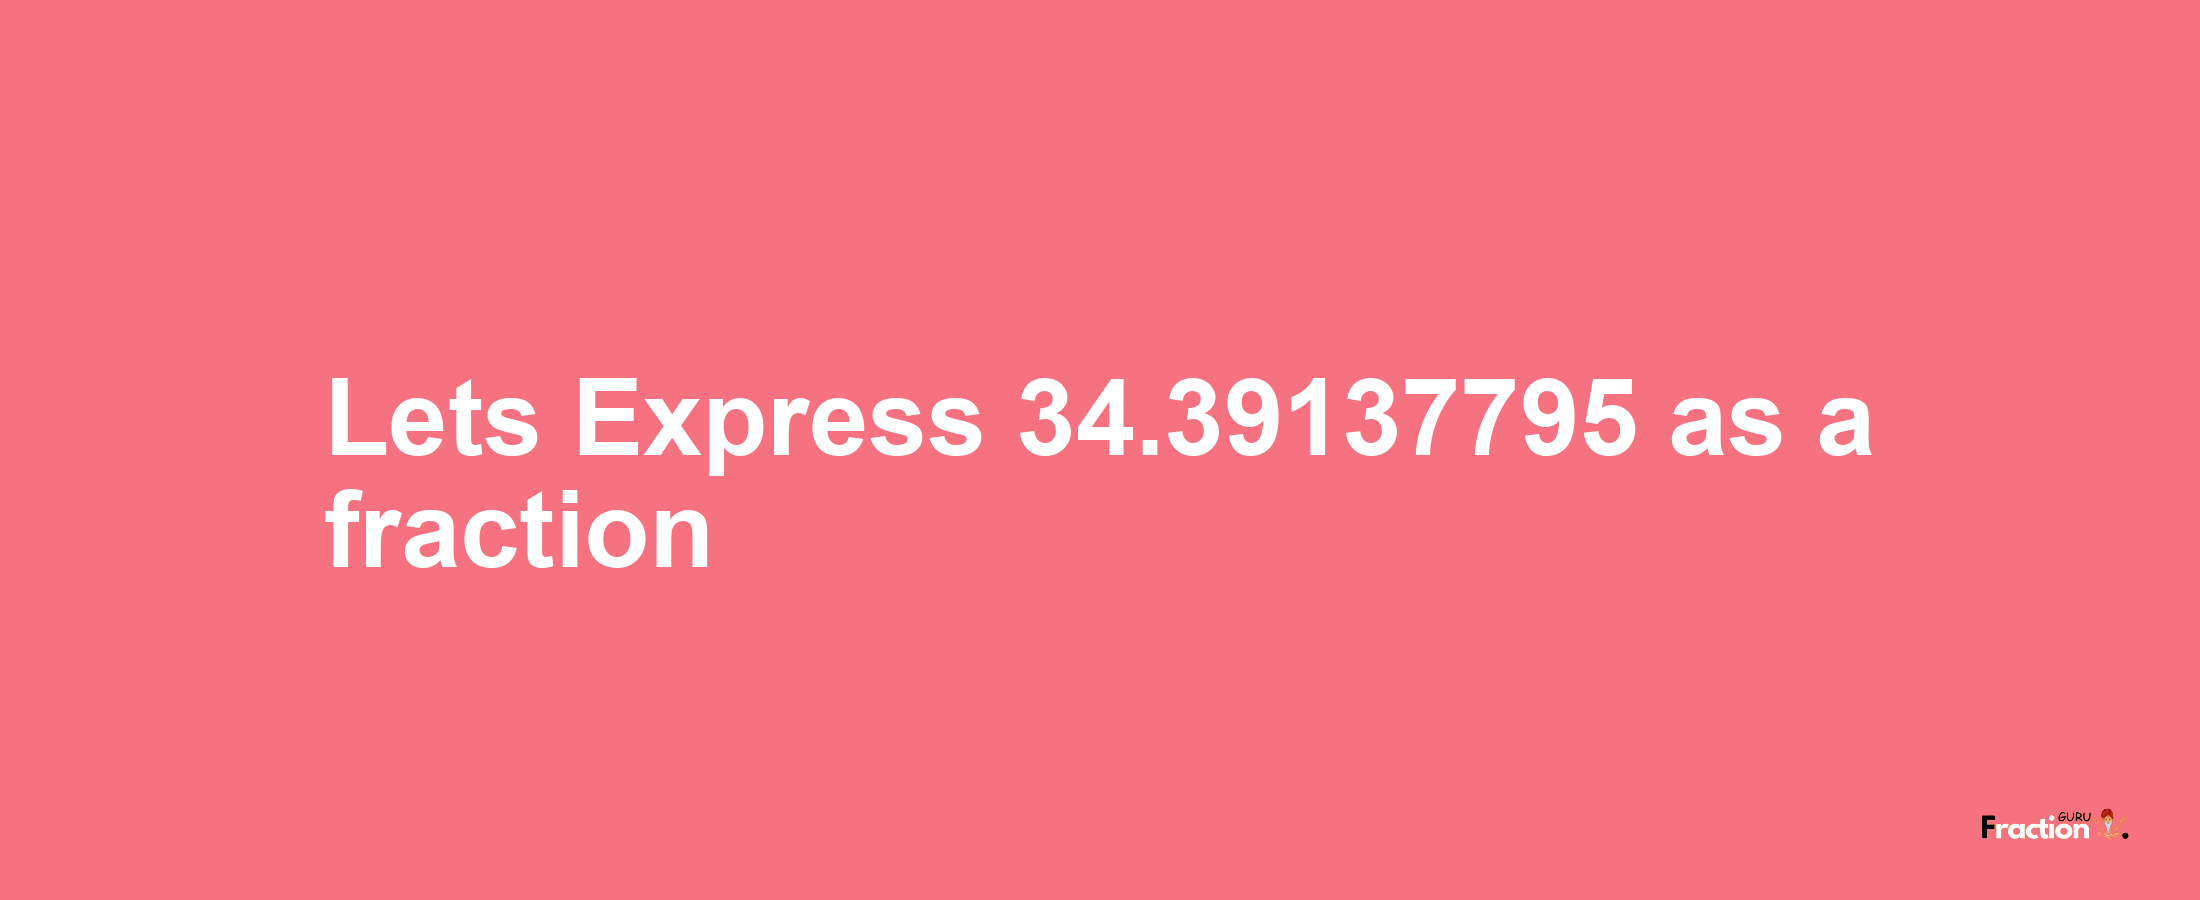 Lets Express 34.39137795 as afraction